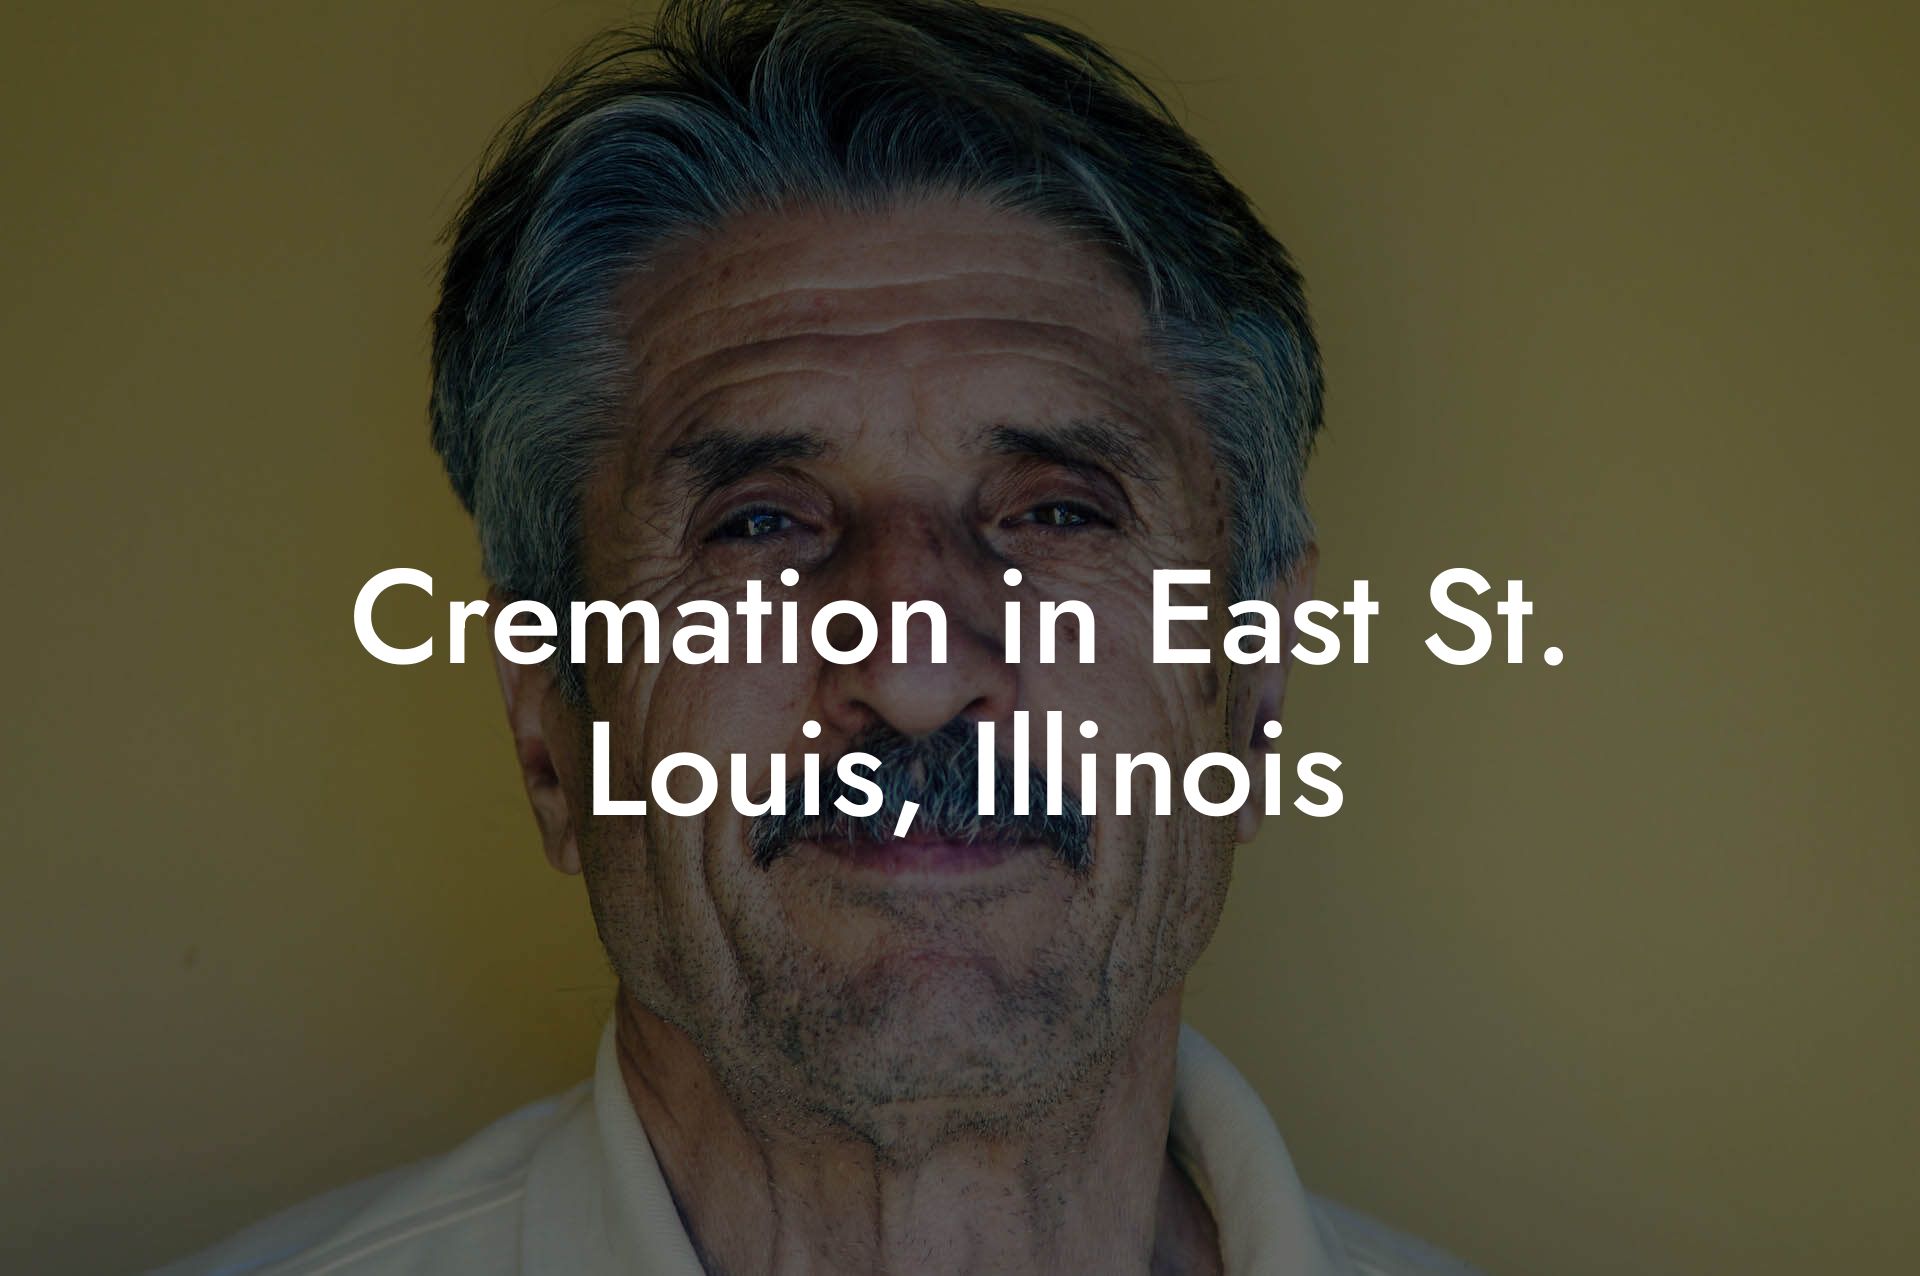 Cremation in East St. Louis, Illinois